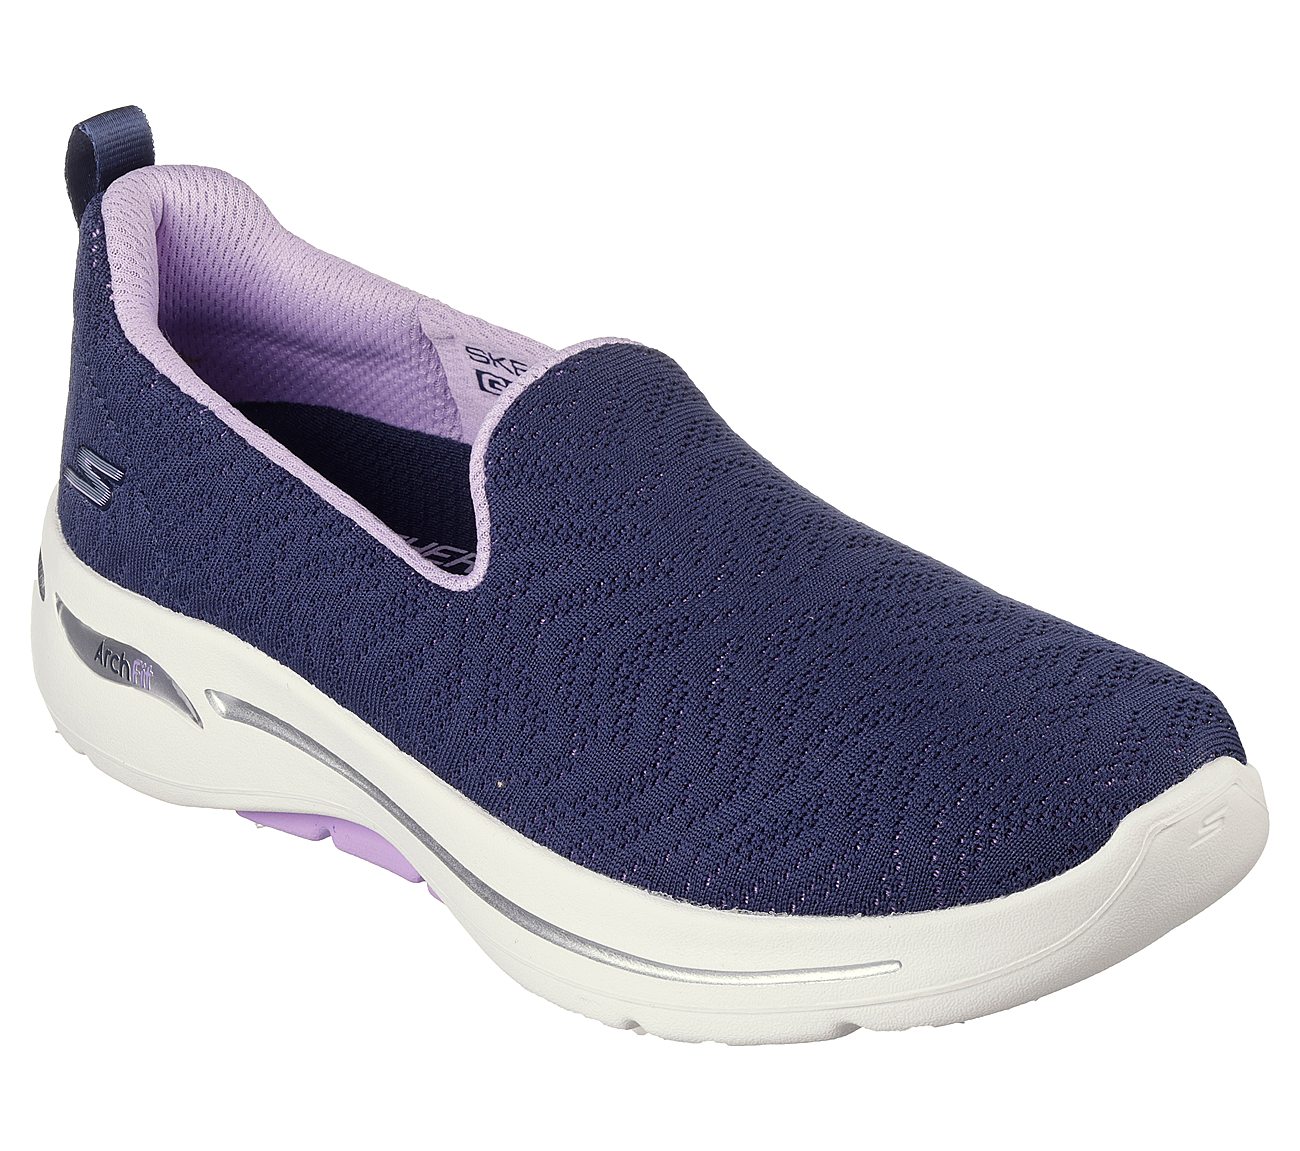 Skechers Navy Go Walk-Arch-Fit-O Slip On Shoes For Women - Style ID ...